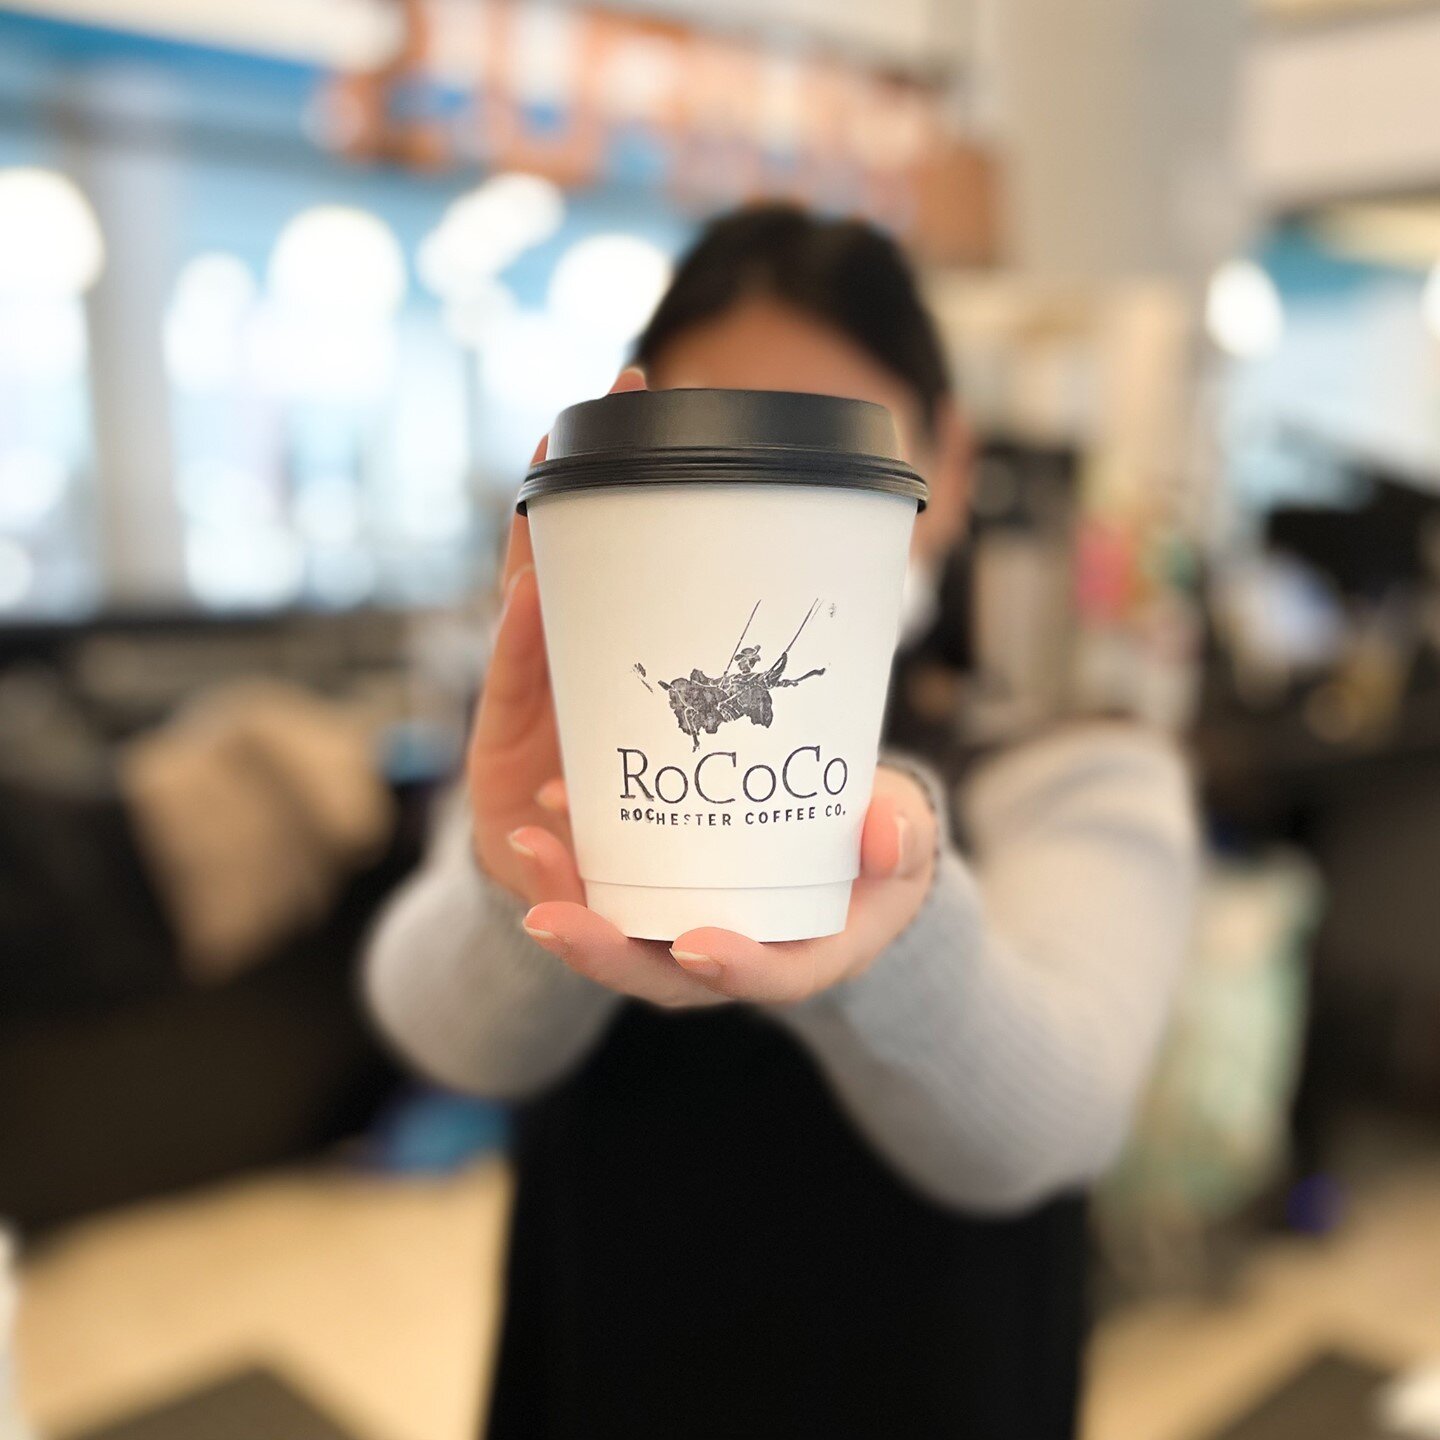 Coffee is ready and waiting for you! ⁠
⁠
⁠
Located in the Sibley Building @Merconmain at 240 East Main Street! Open 6:30a-4pm everyday! ⁠
⁠
⁠
#rochesterny #roccoffee #roccoffeesociety #585 #supportlocal